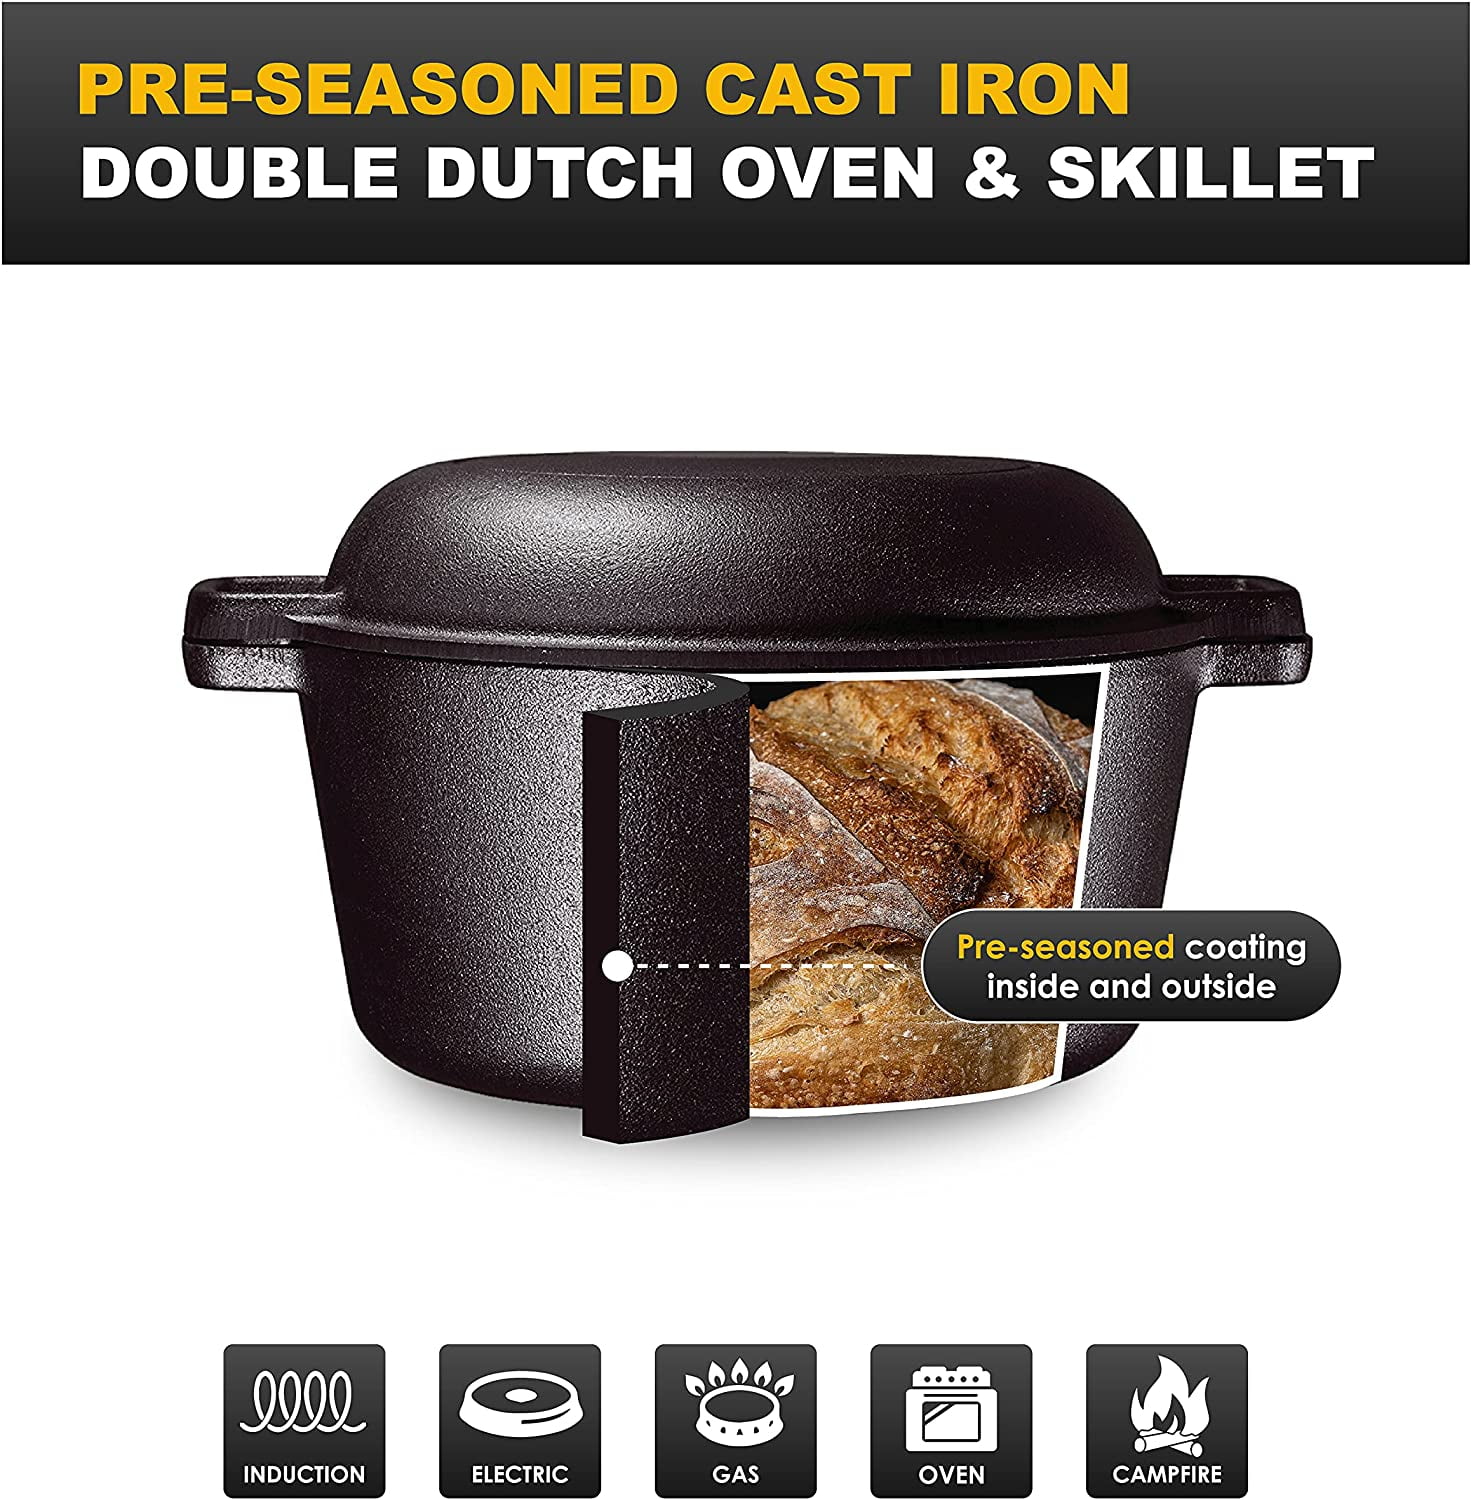 2 in 1 Dutch Oven with Skillet Lid Cookbook 5 Quart – Overmont